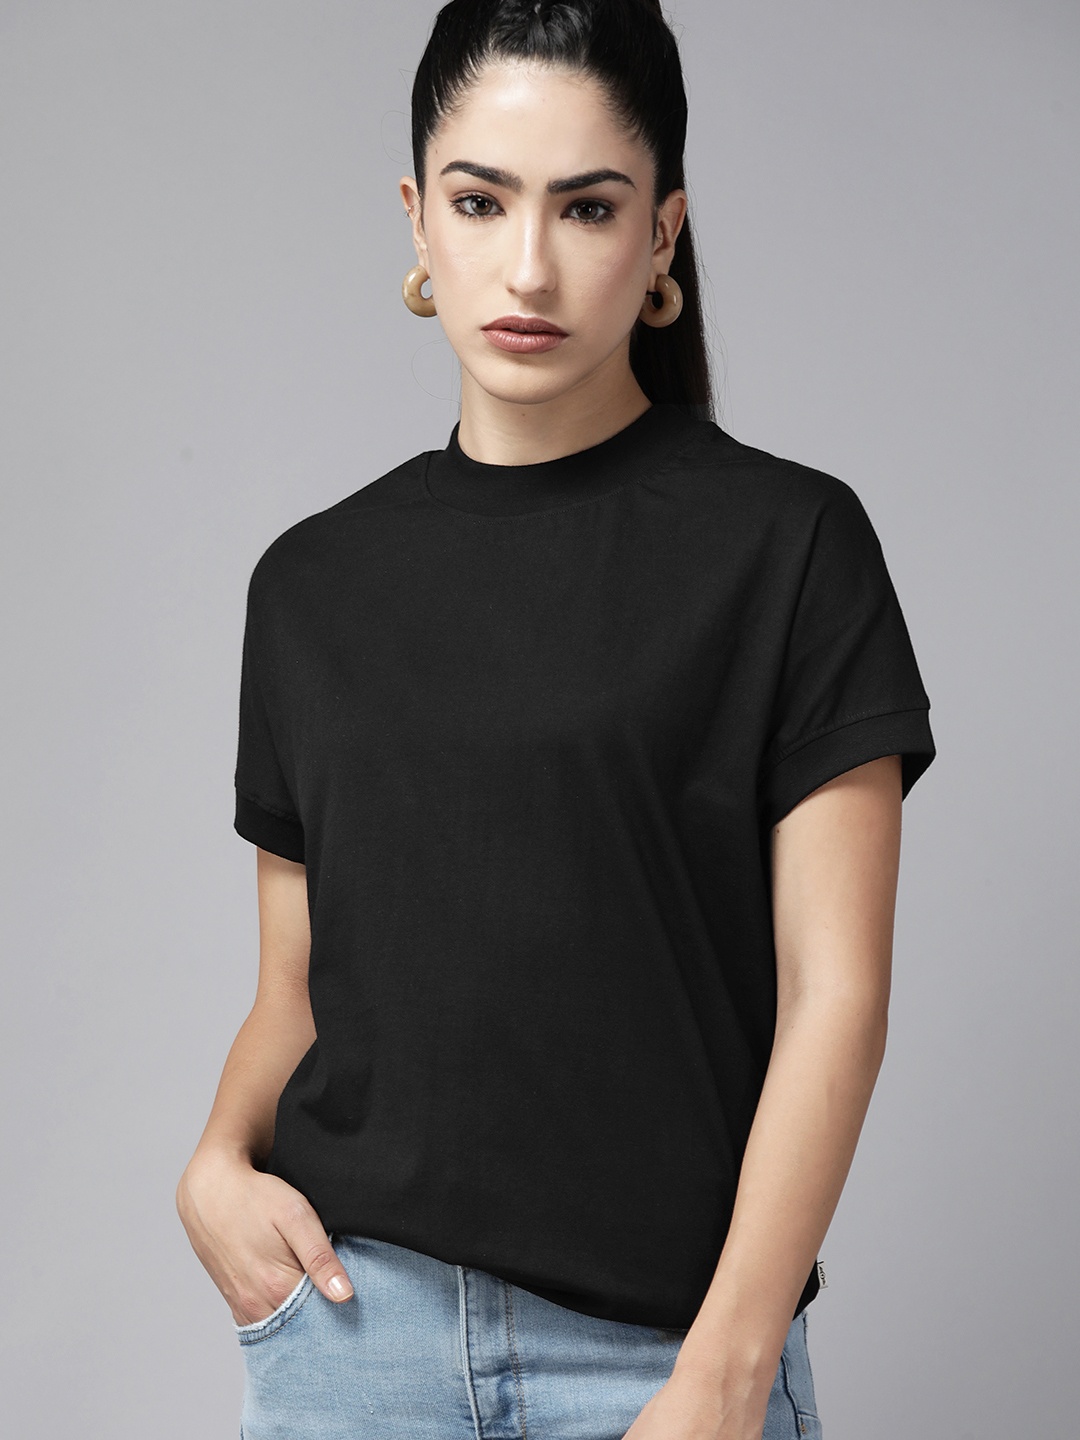 

The Roadster Lifestyle Co. Oversized High Neck Extended Sleeves Pure Cotton T-shirt, Black